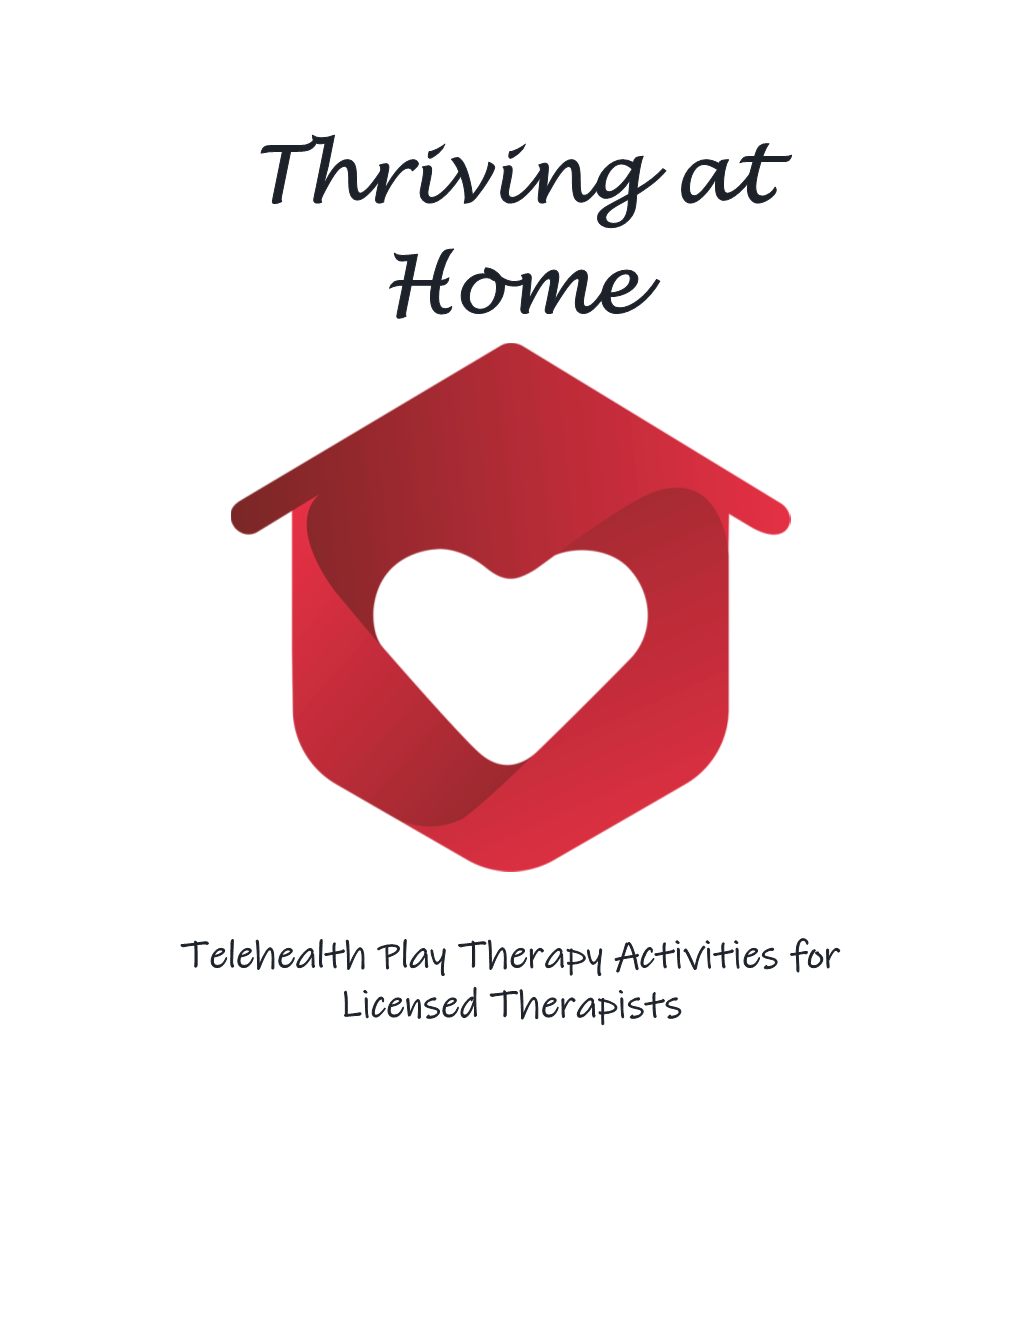 Telehealth Play Therapy Activities for Licensed Therapists